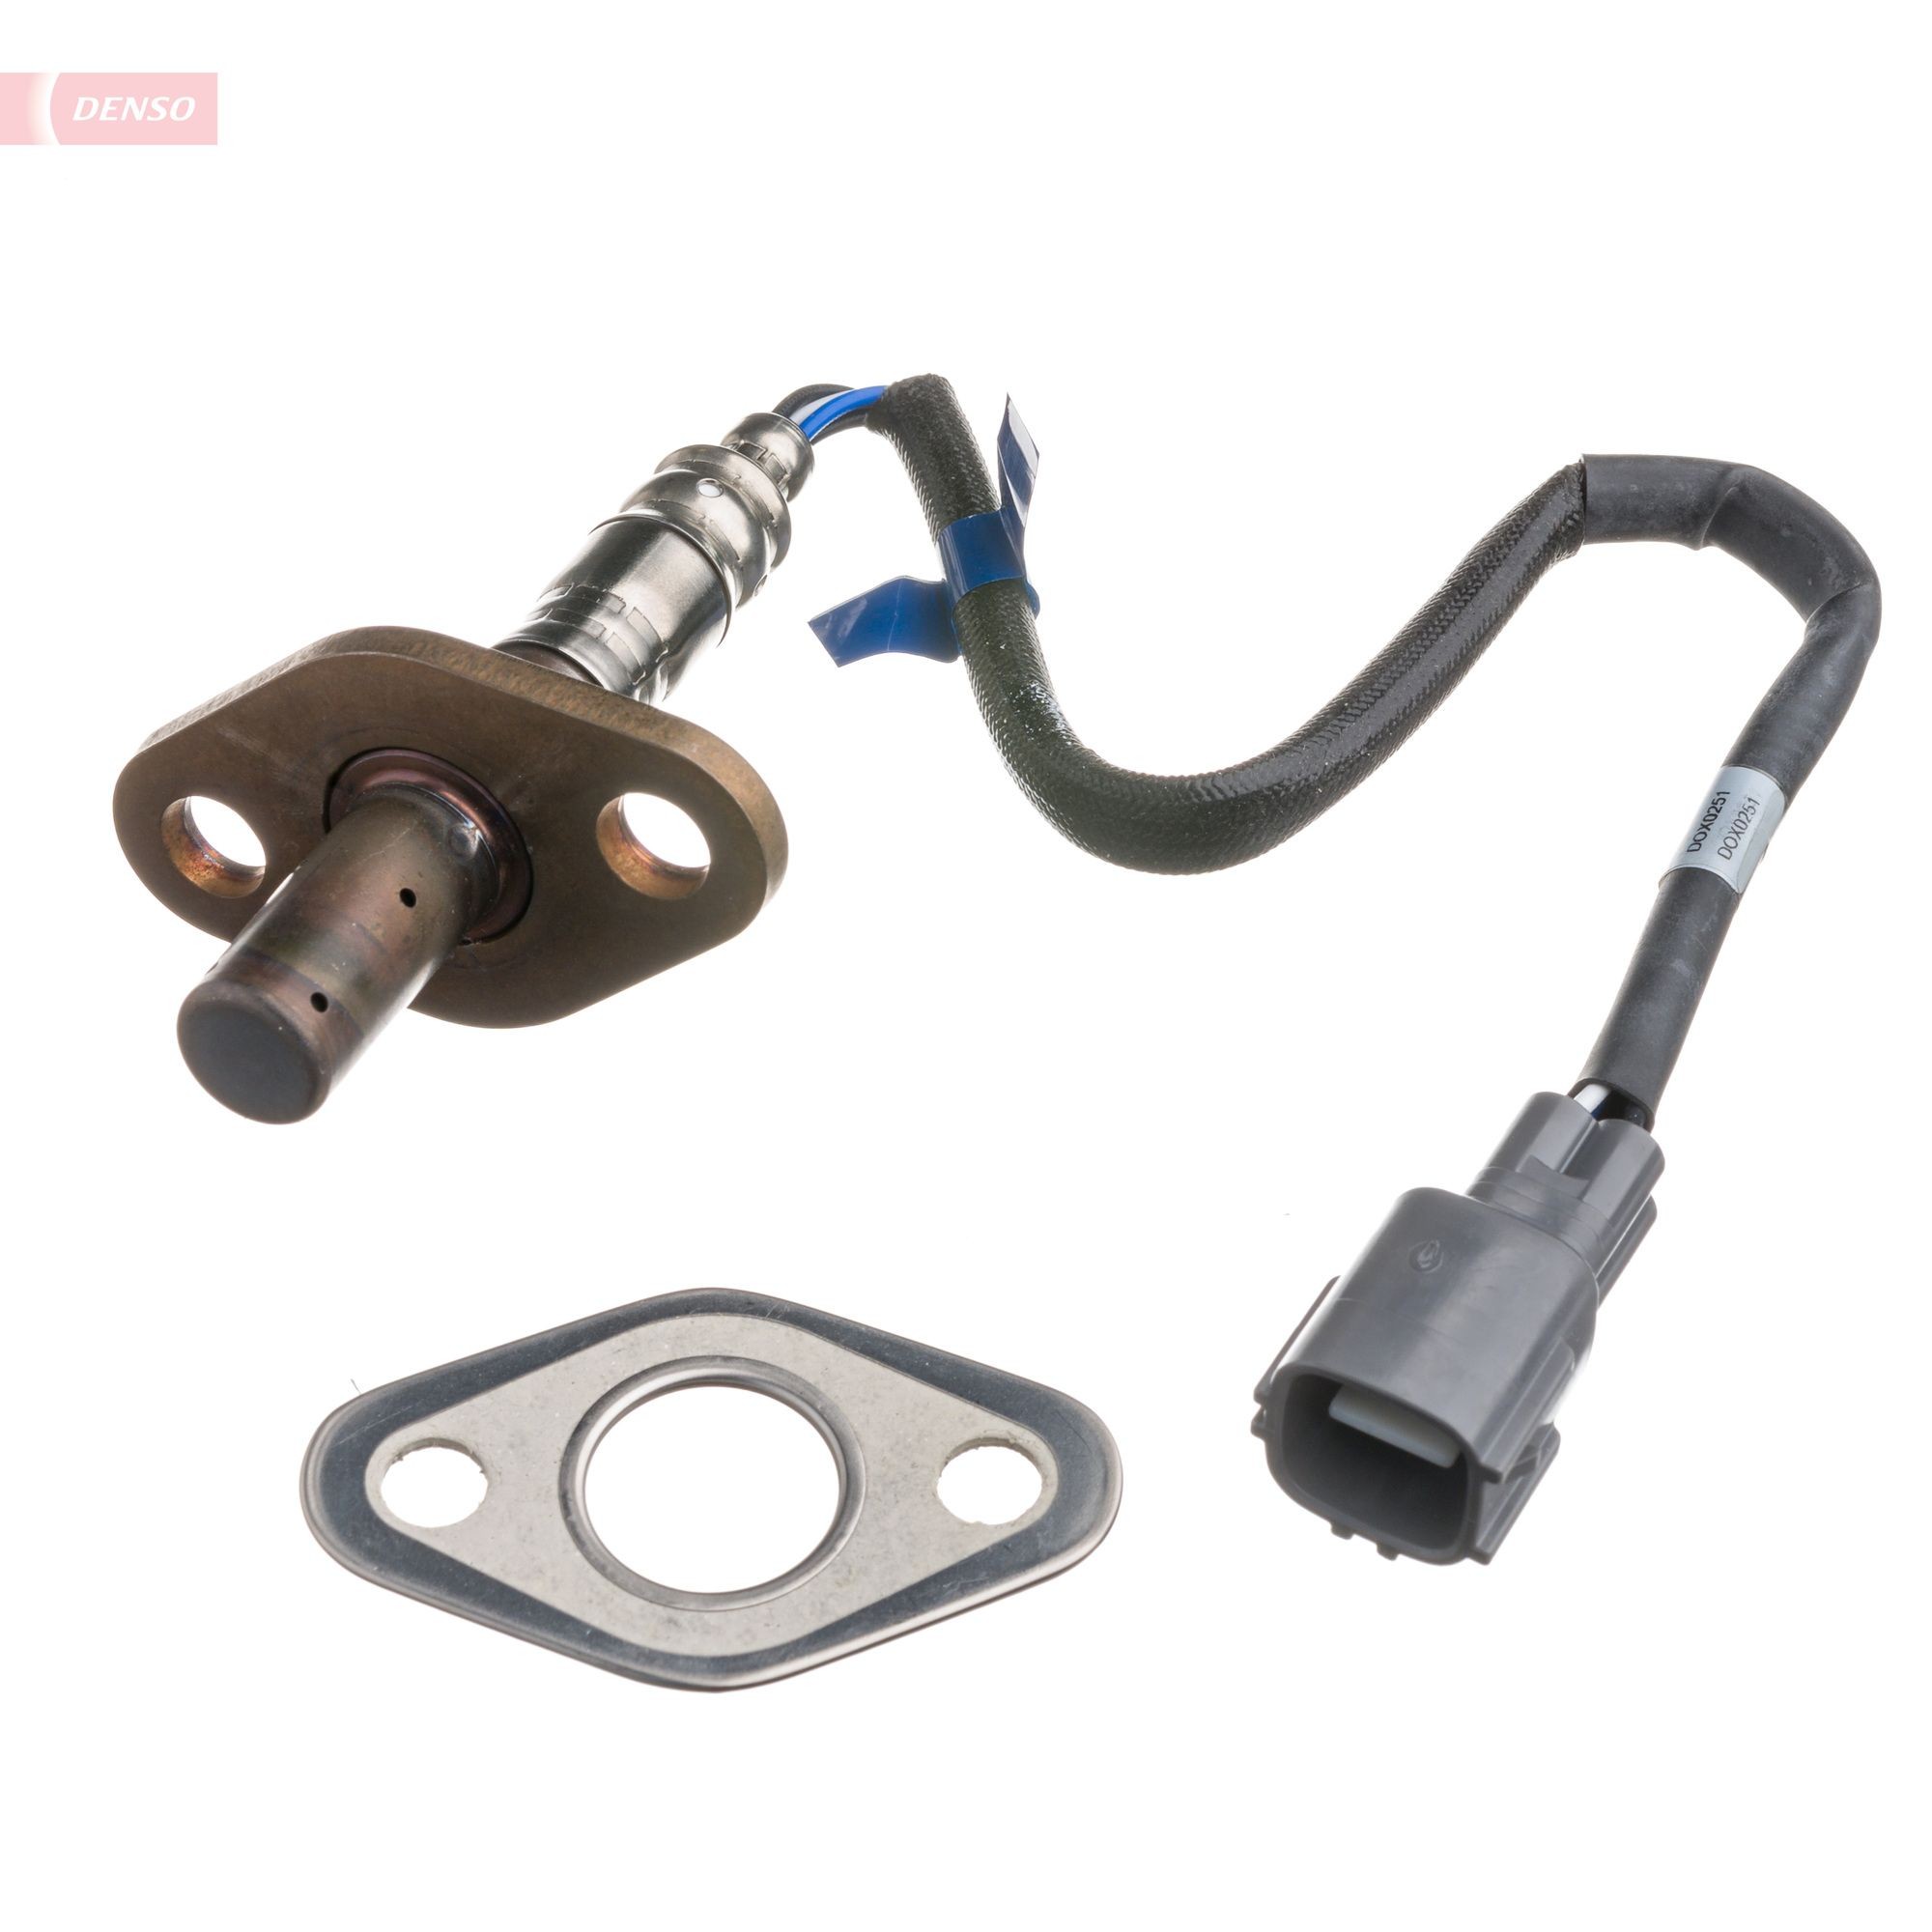 Lambda sensor DENSO DOX-0251 - Exhaust spare parts for Toyota order